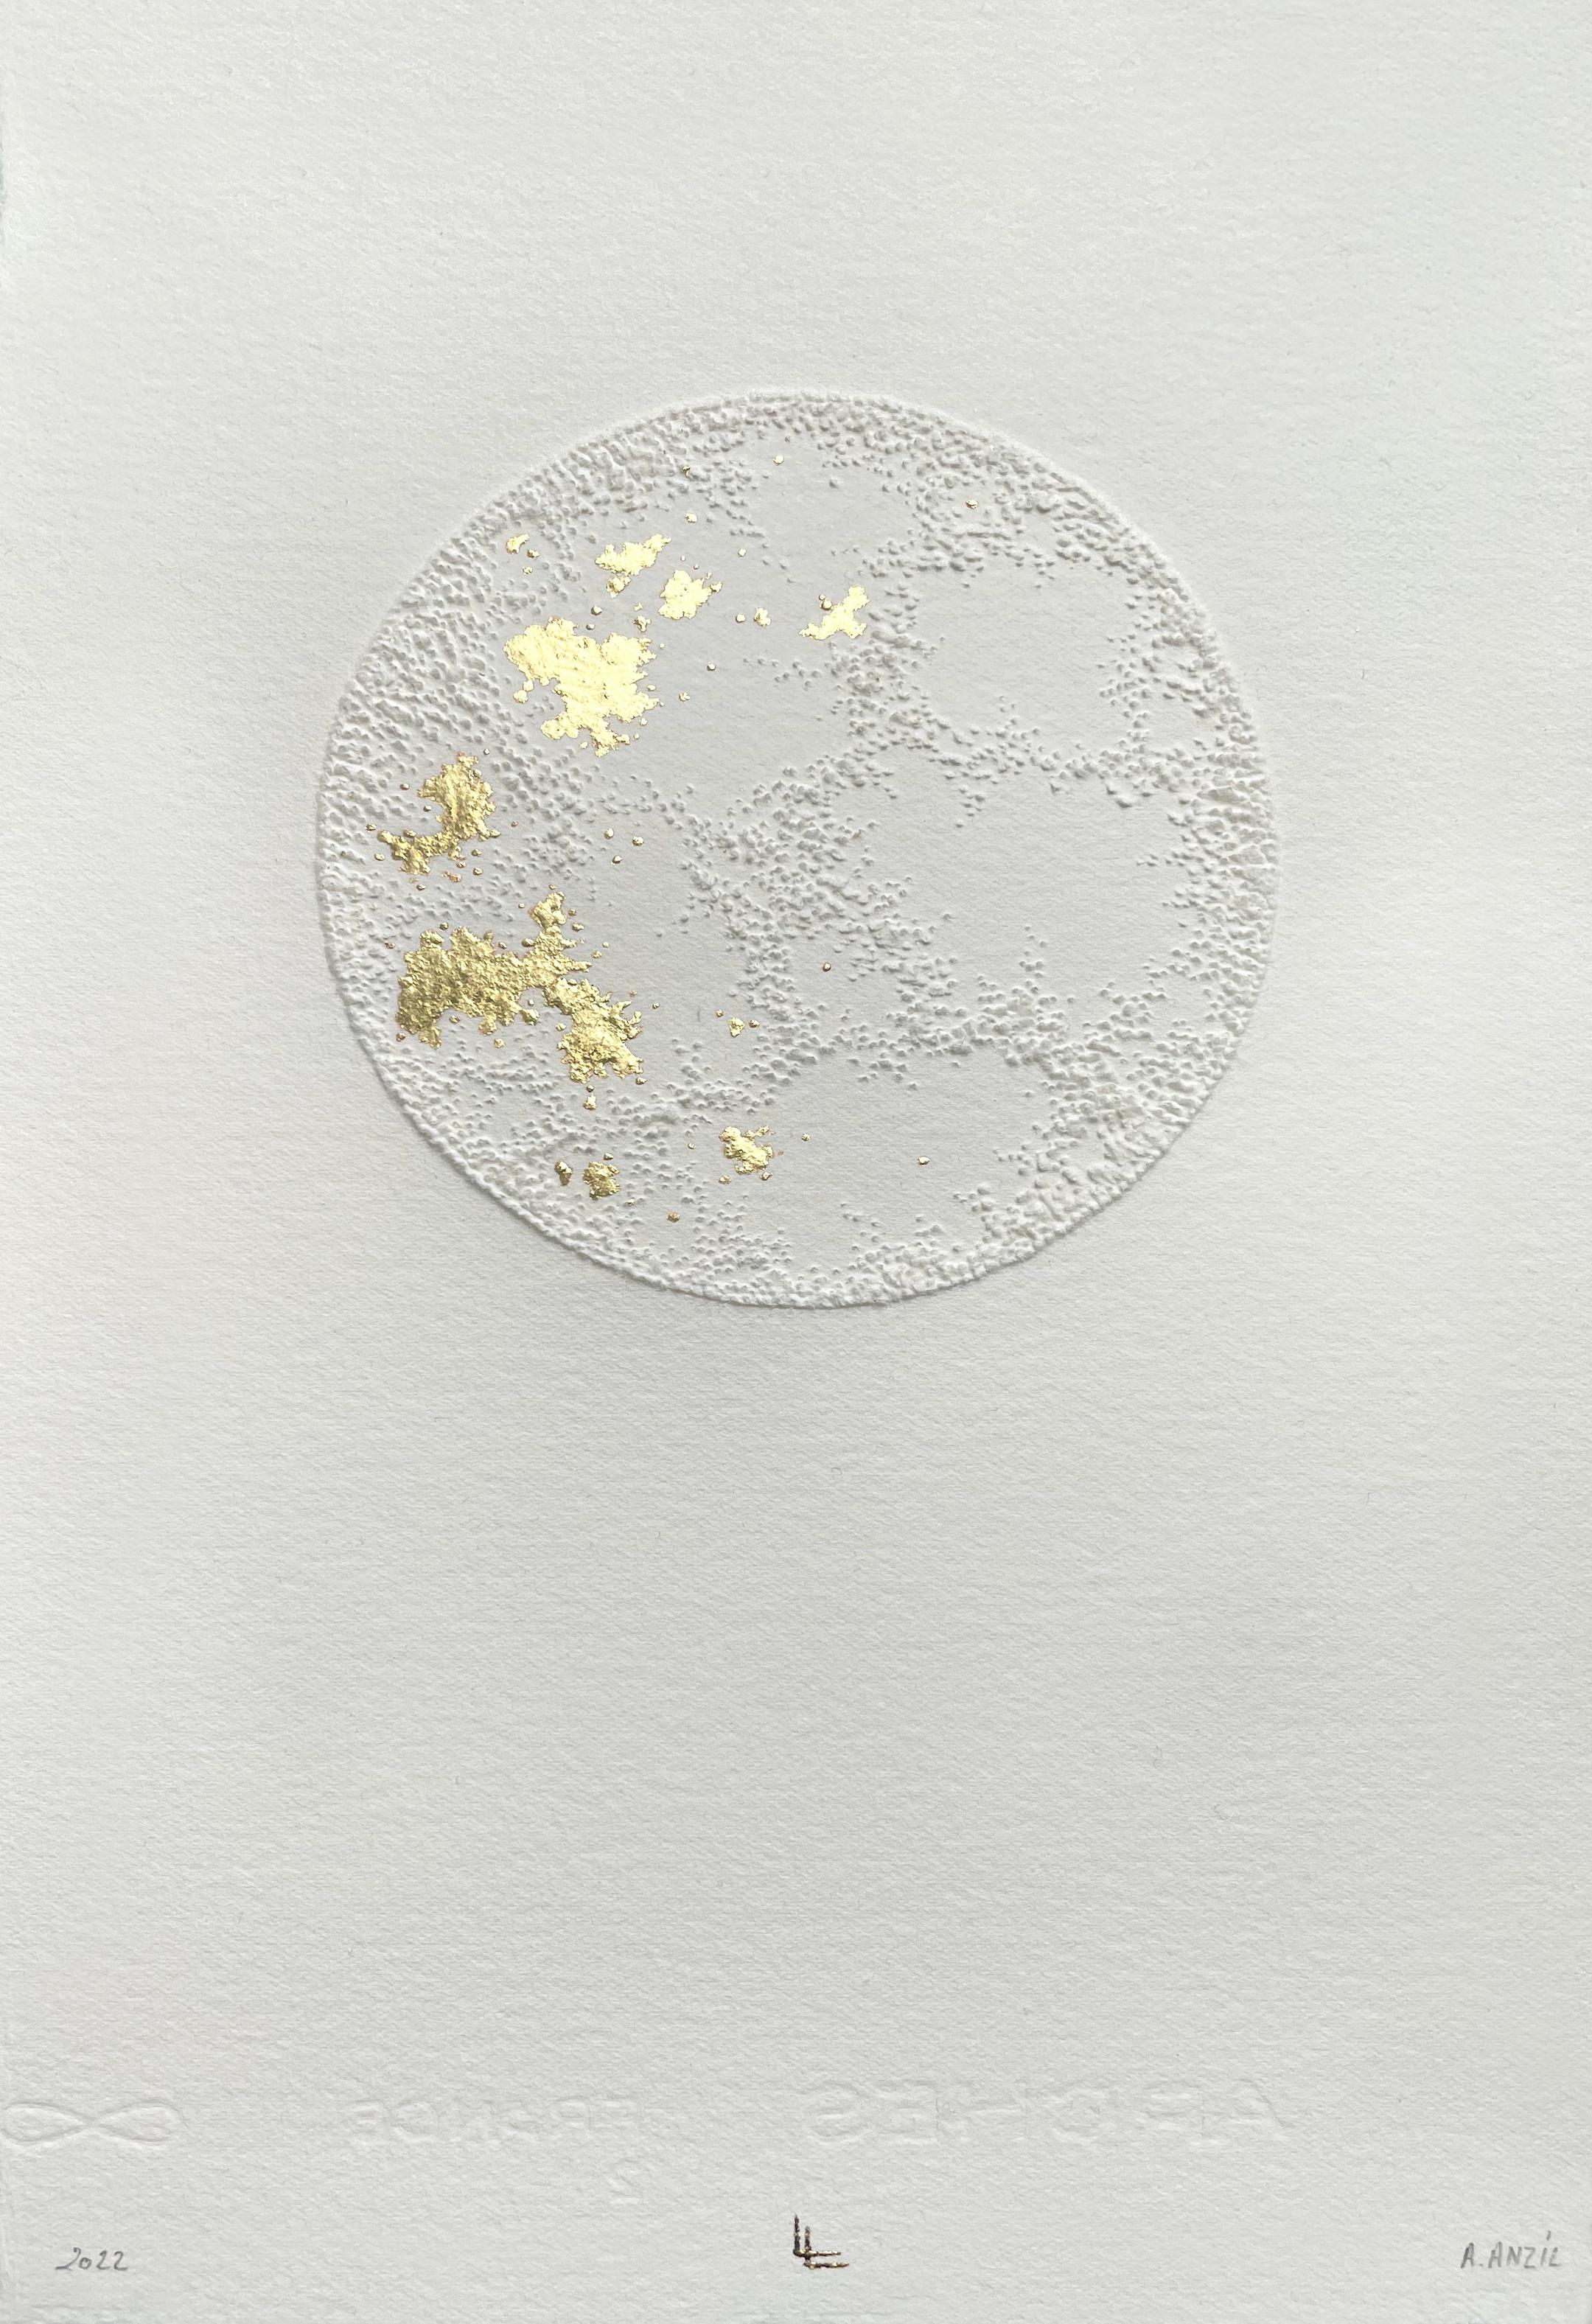 Moon 1 - white 3D abstract circle with gold leaves and pulled paper fiber